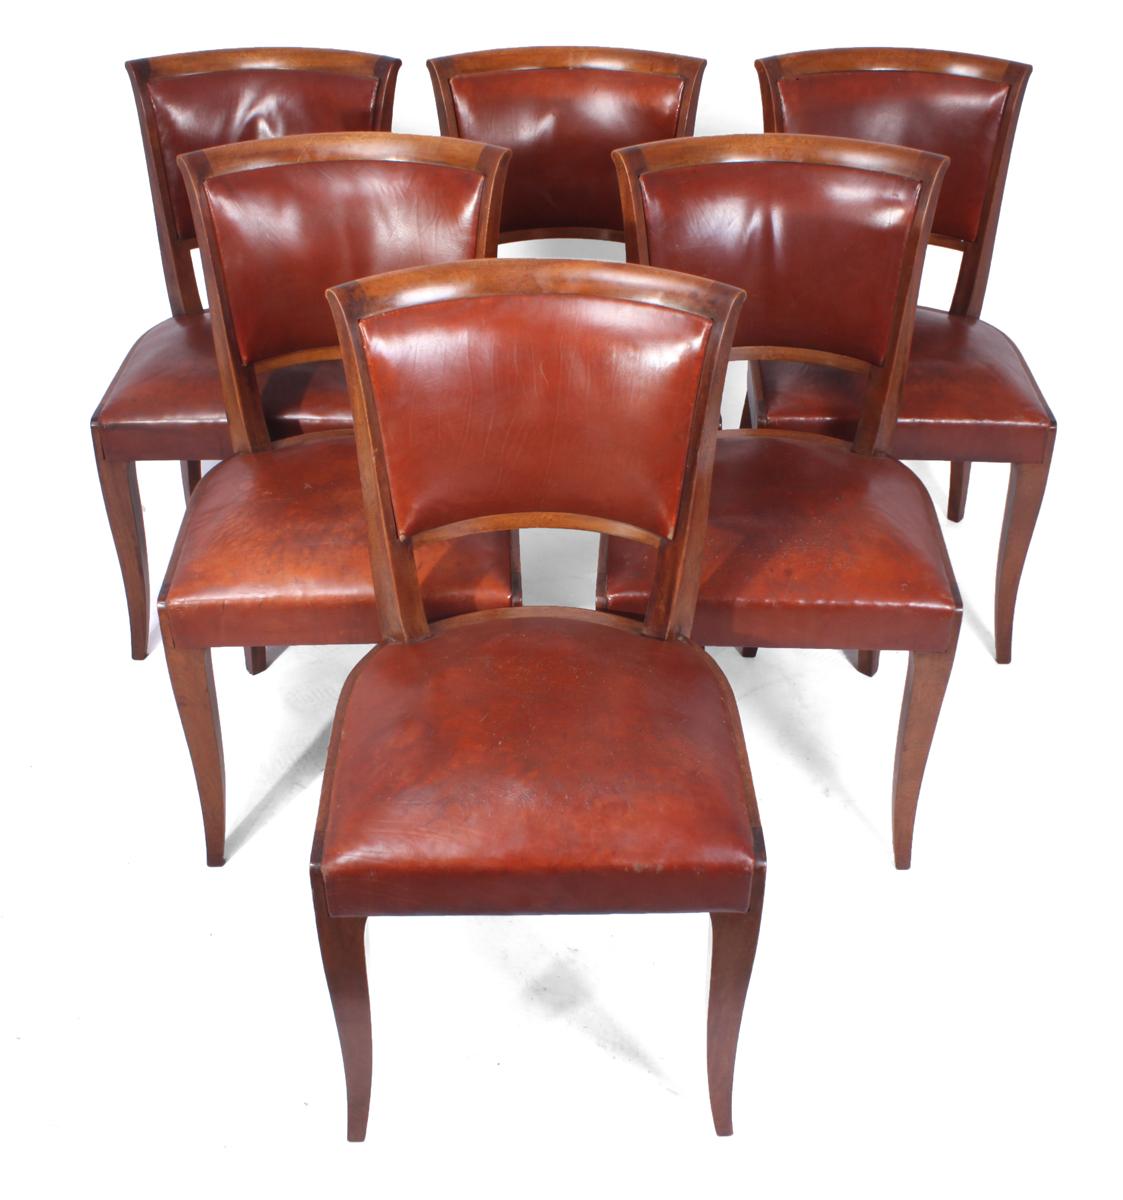 French Art Deco dining chairs, circa 1930

A set of 6 solid mahogany dining chairs with original leather upholstery in original condition, the chairs have good art deco Parisian style with sweeping back legs, the chairs are solid with no loose